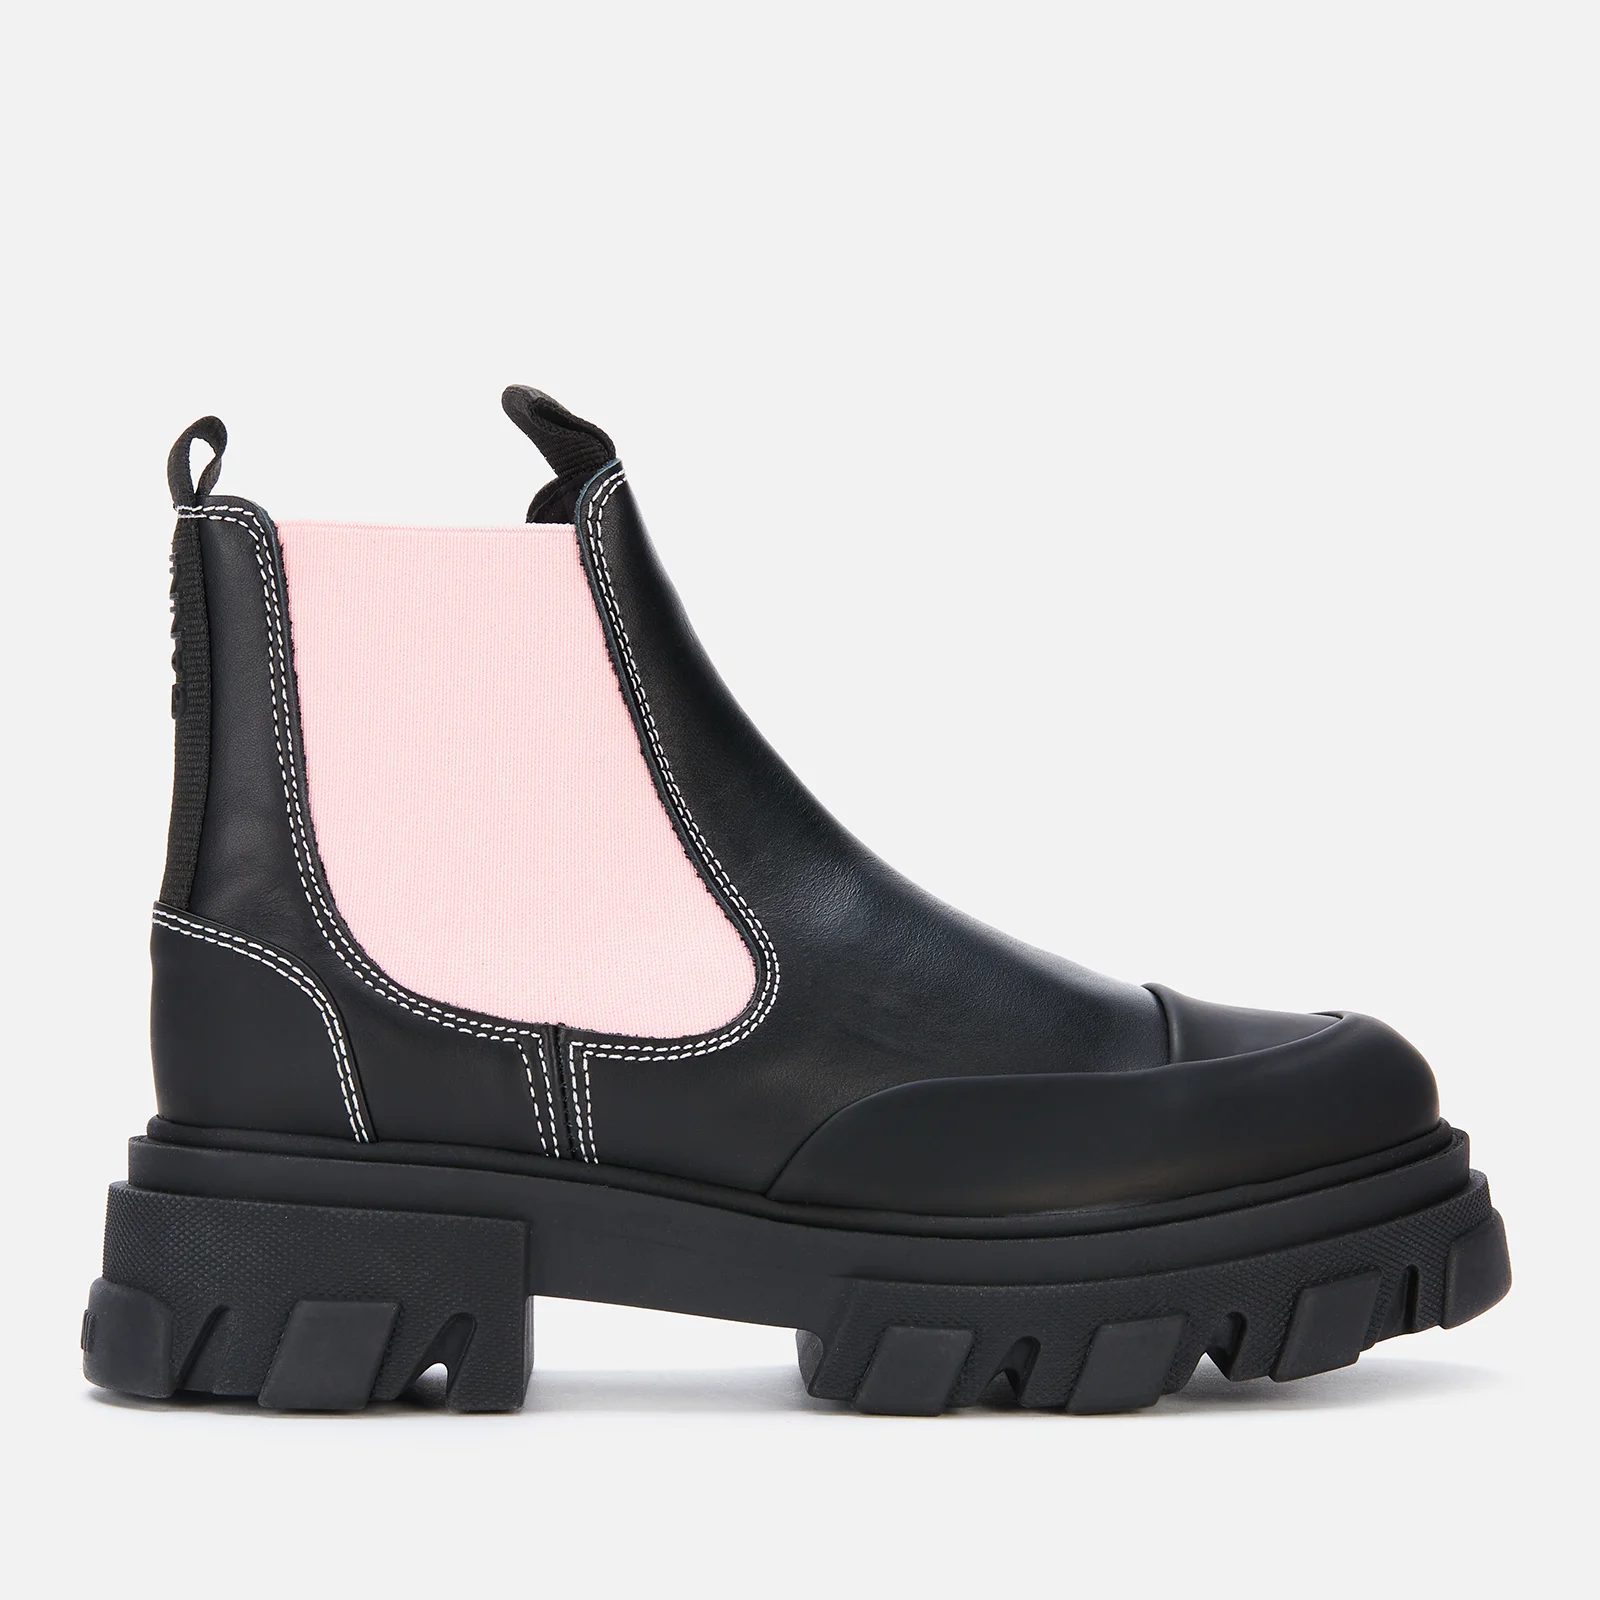 Ganni Women's Leather Chelsea Boots - Black/Pink Image 1